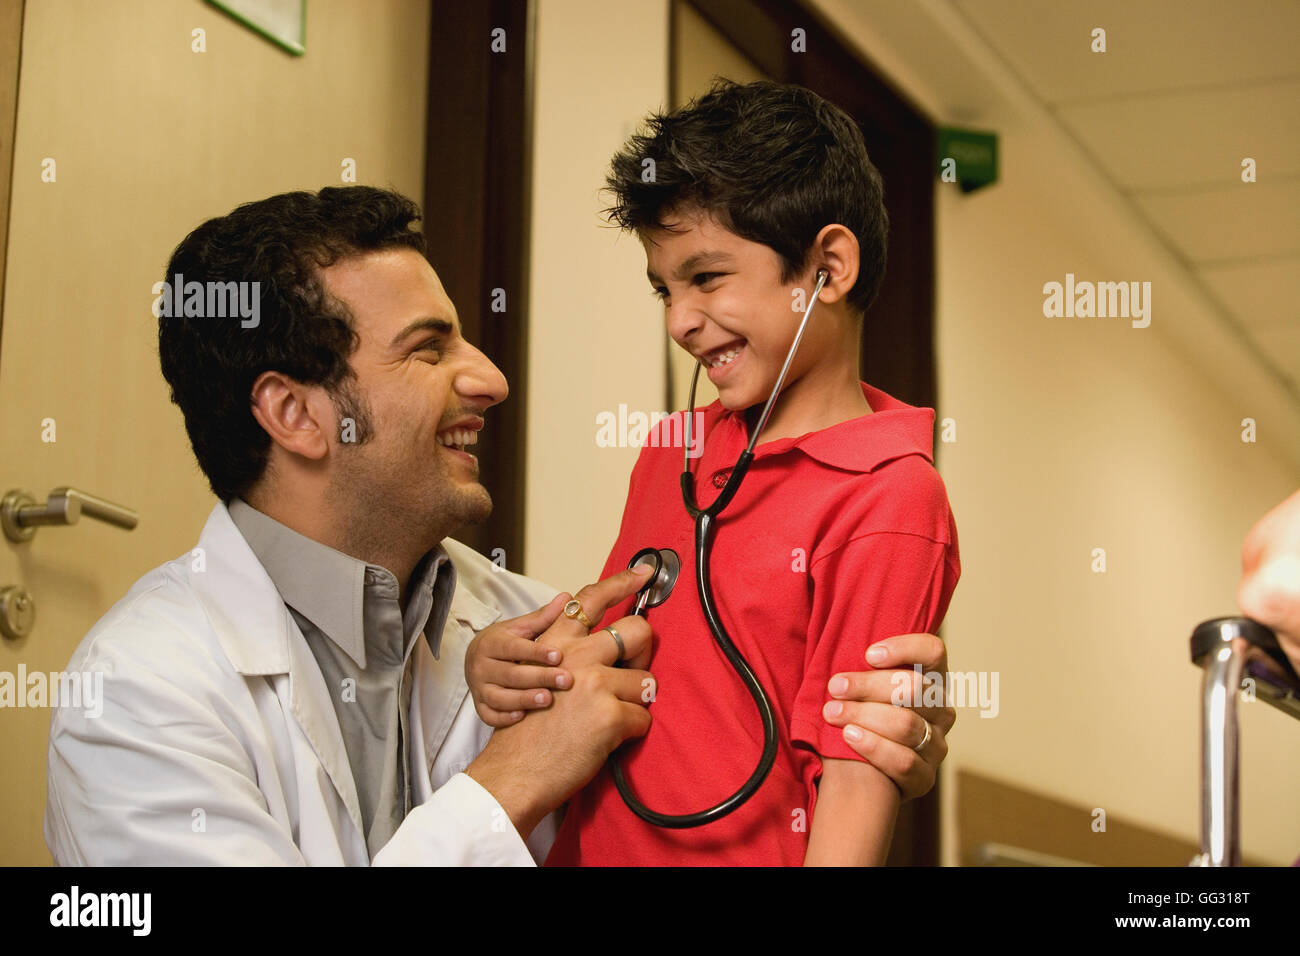 Doctor having fun with his patient Stock Photo